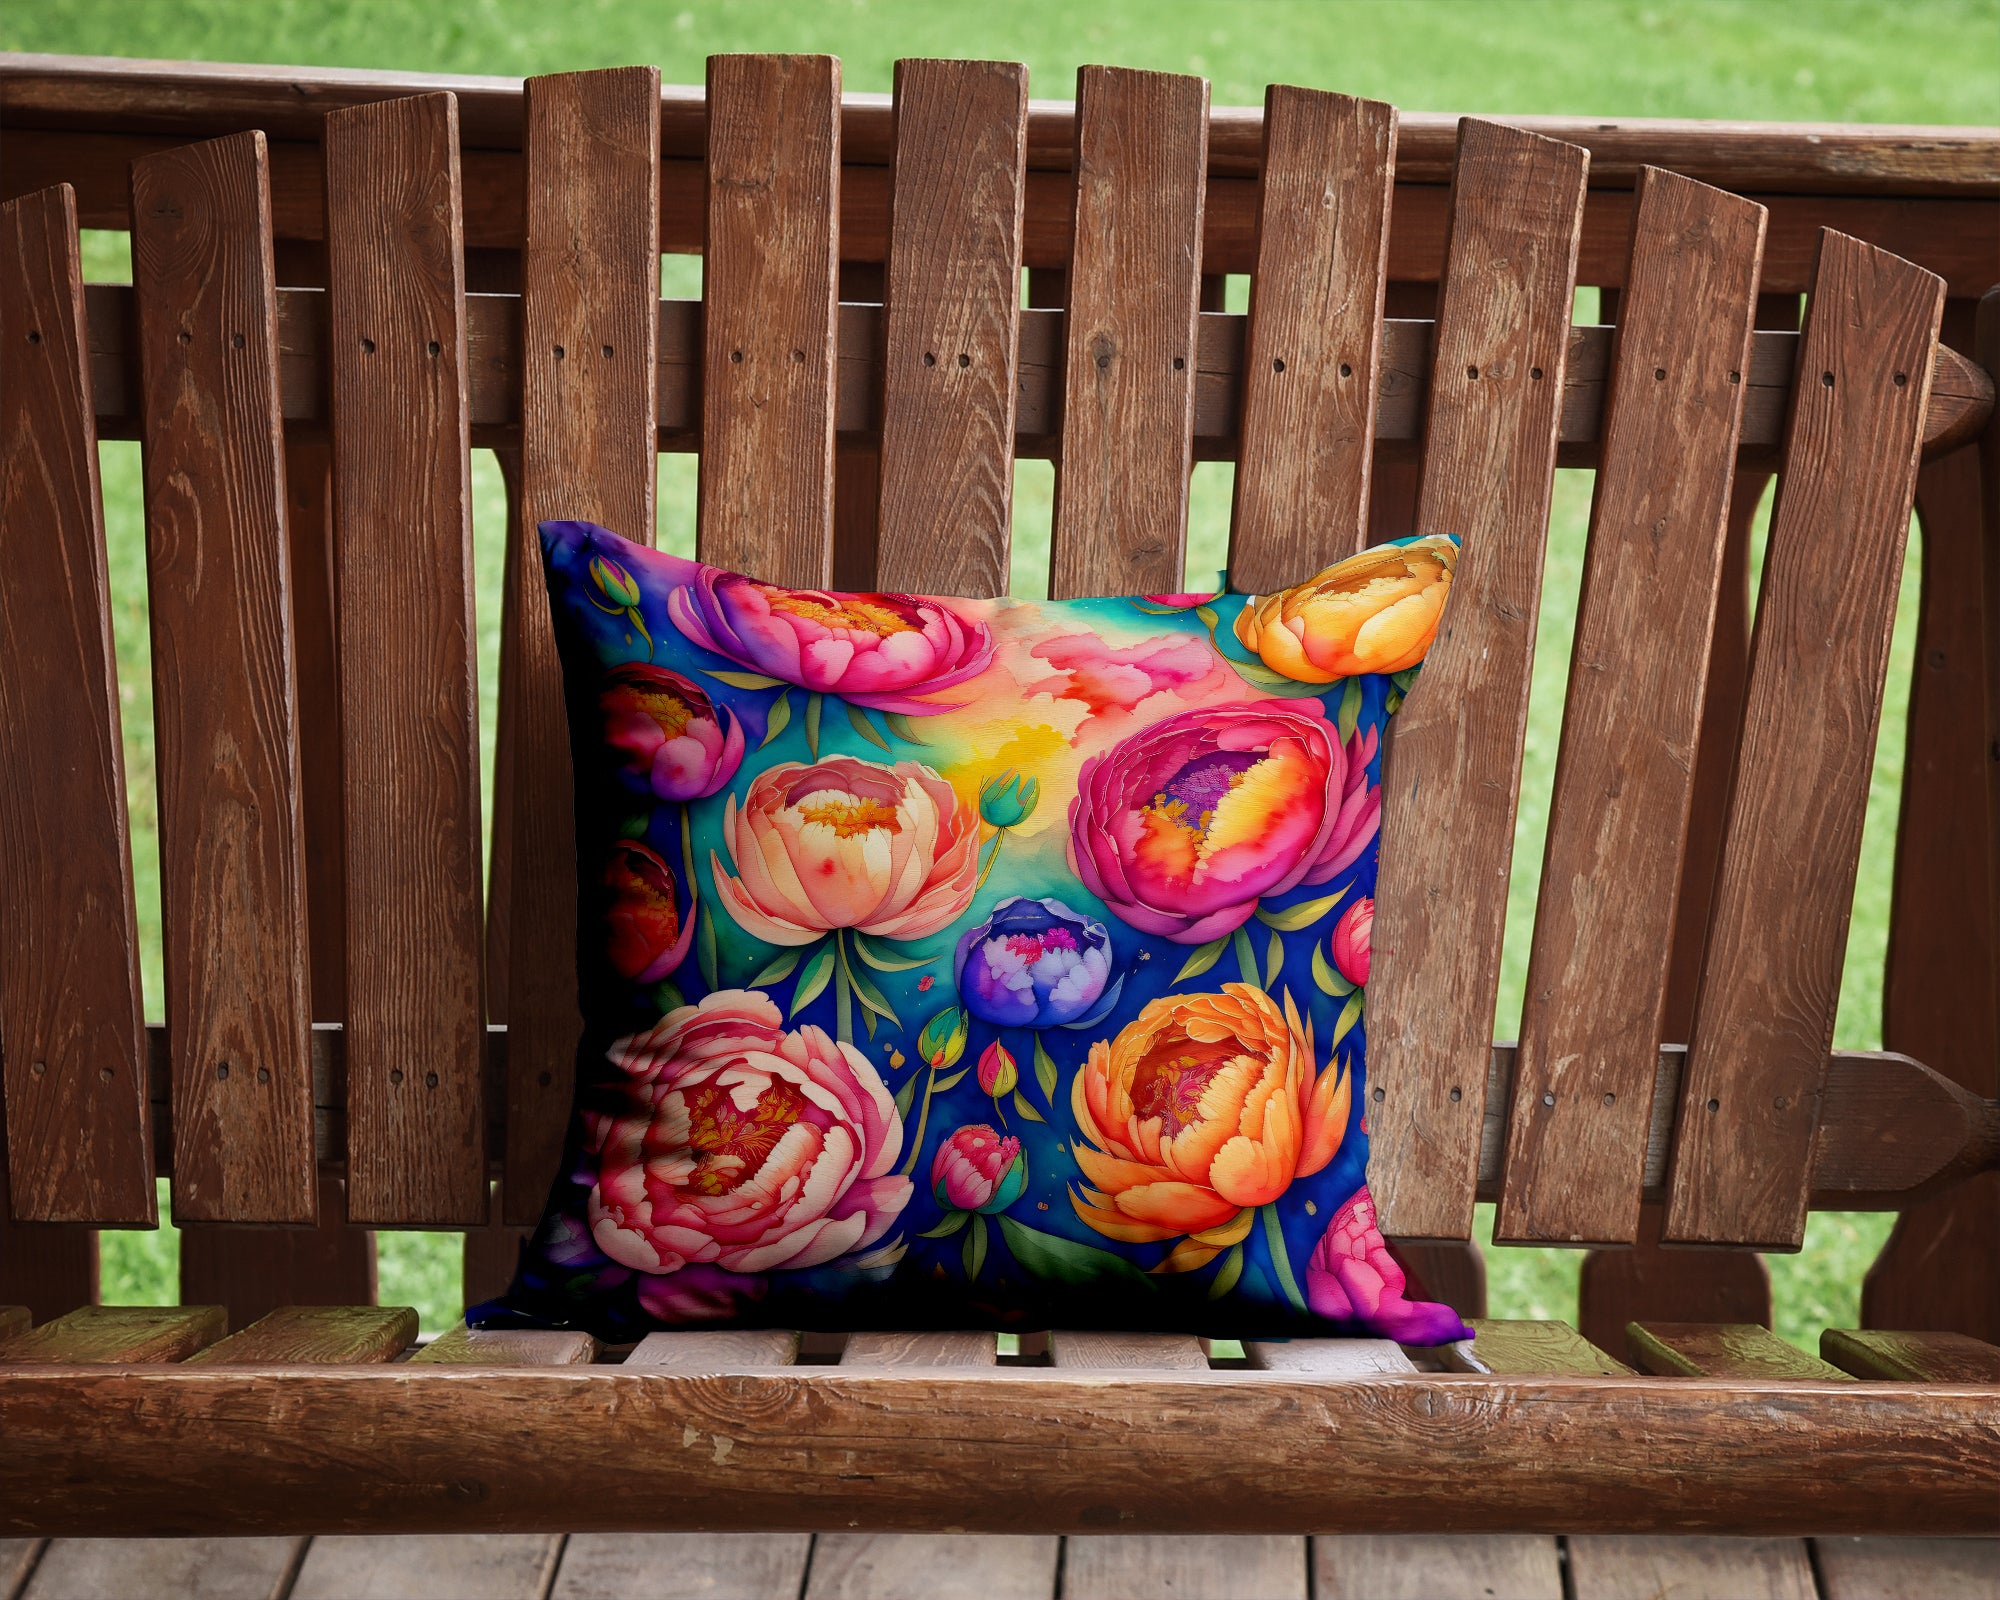 Colorful Peonies Fabric Decorative Pillow